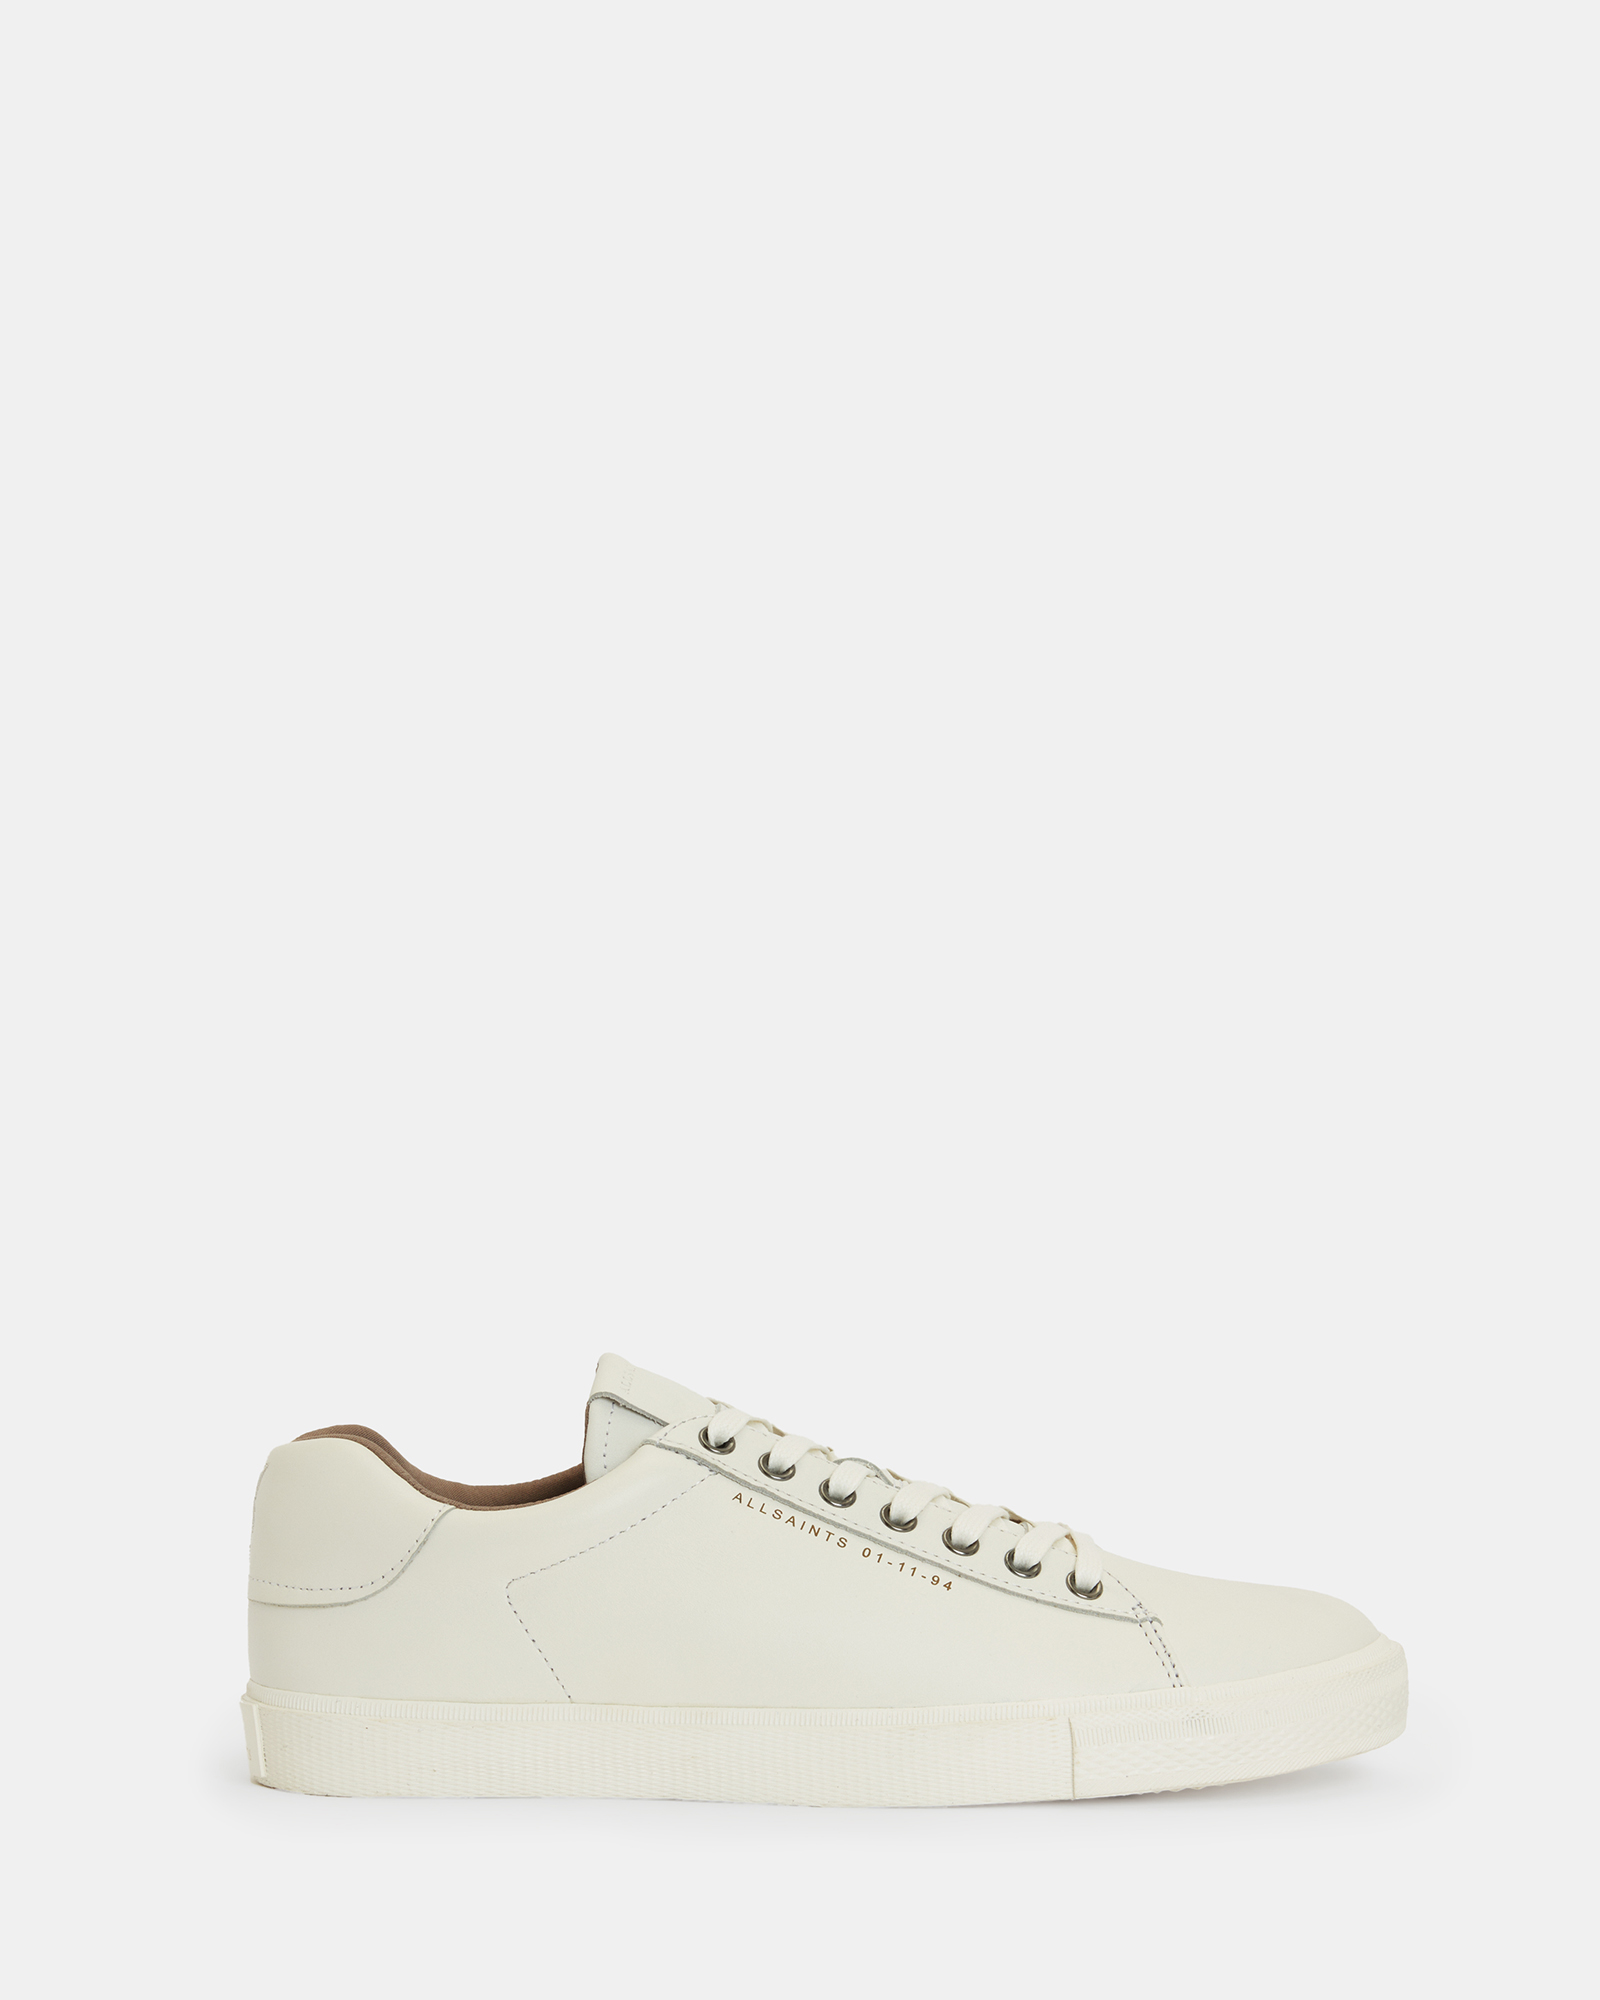 Brody Leather Low Top Sneakers White | ALLSAINTS US